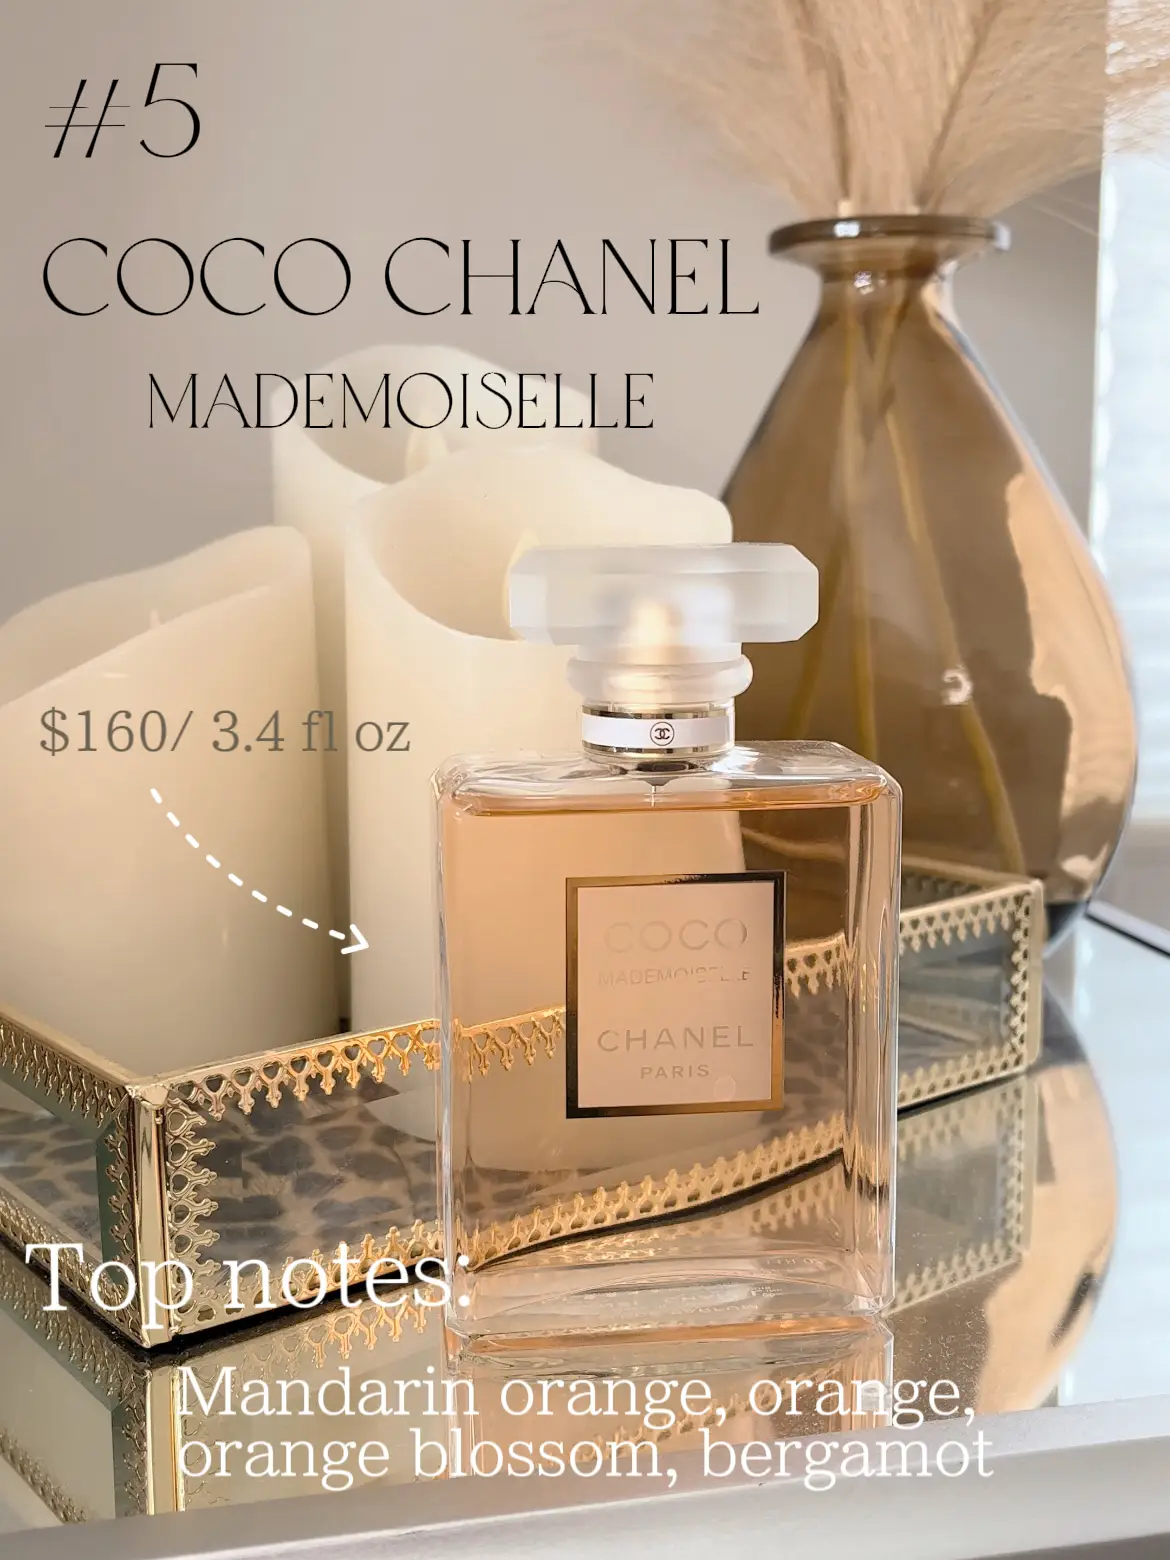 Top 5 perfumes that will turn heads, Gallery posted by Amandas World